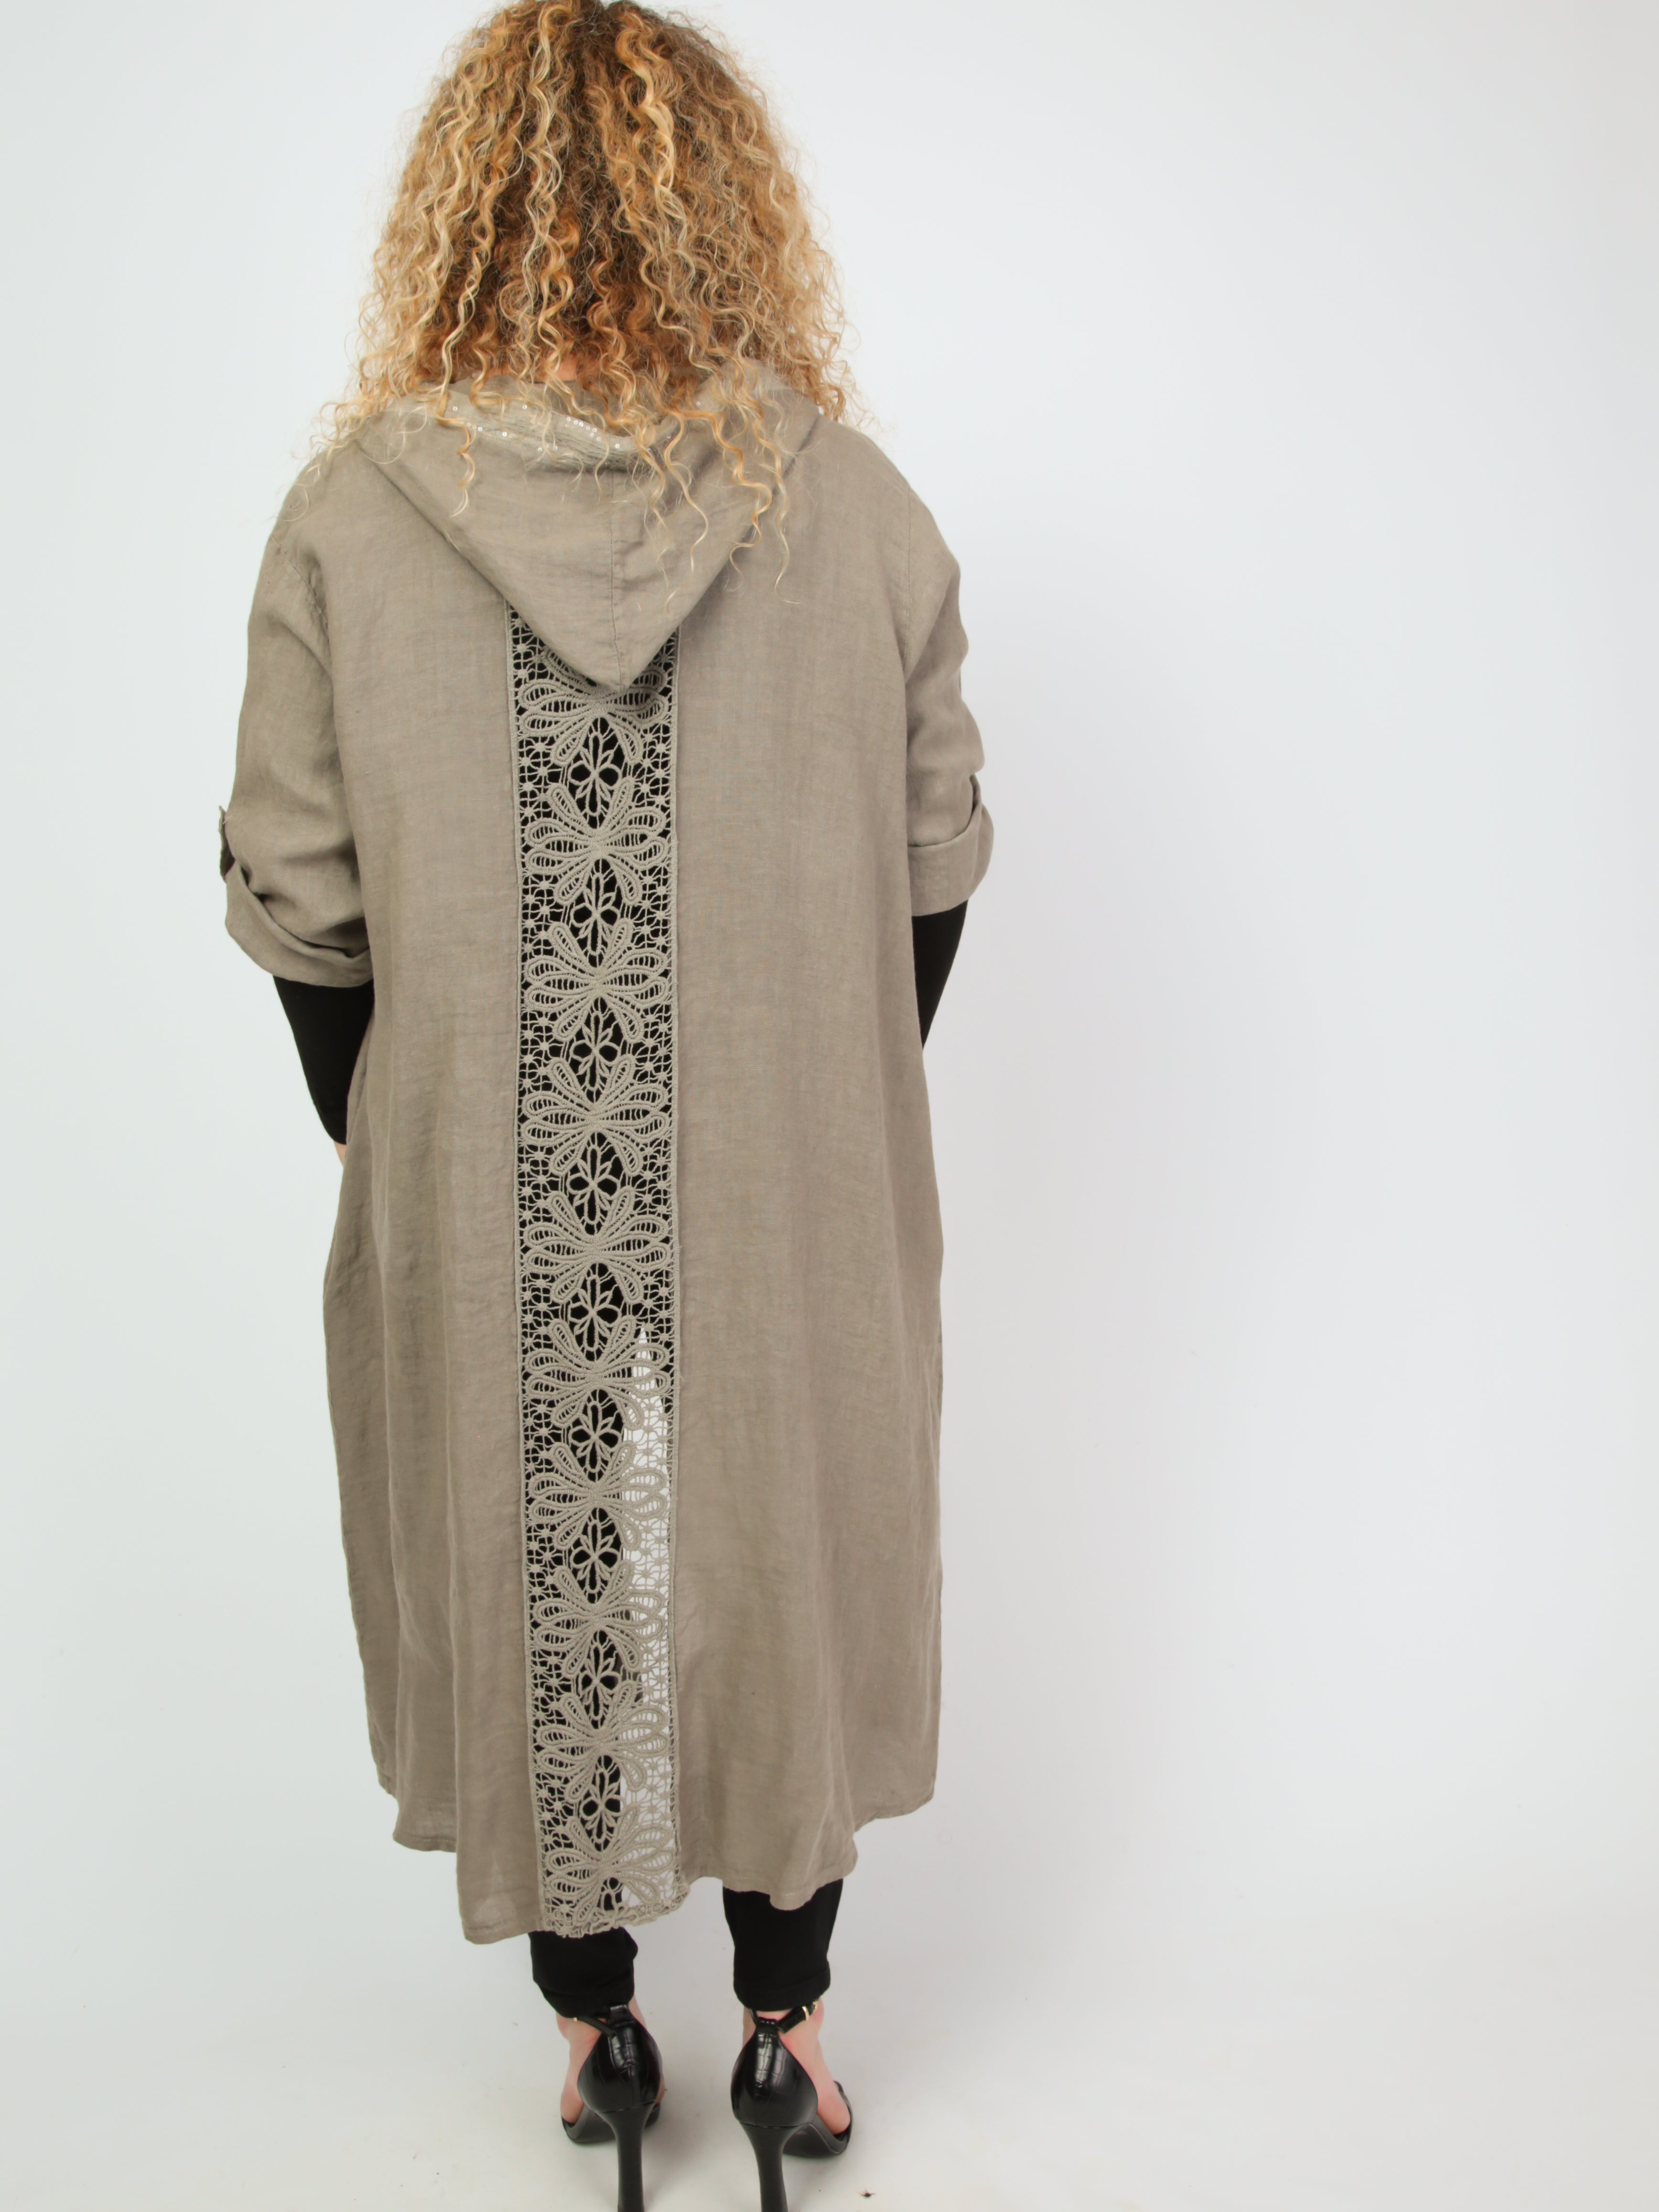 Krone 1 linen coat with lace and sequins